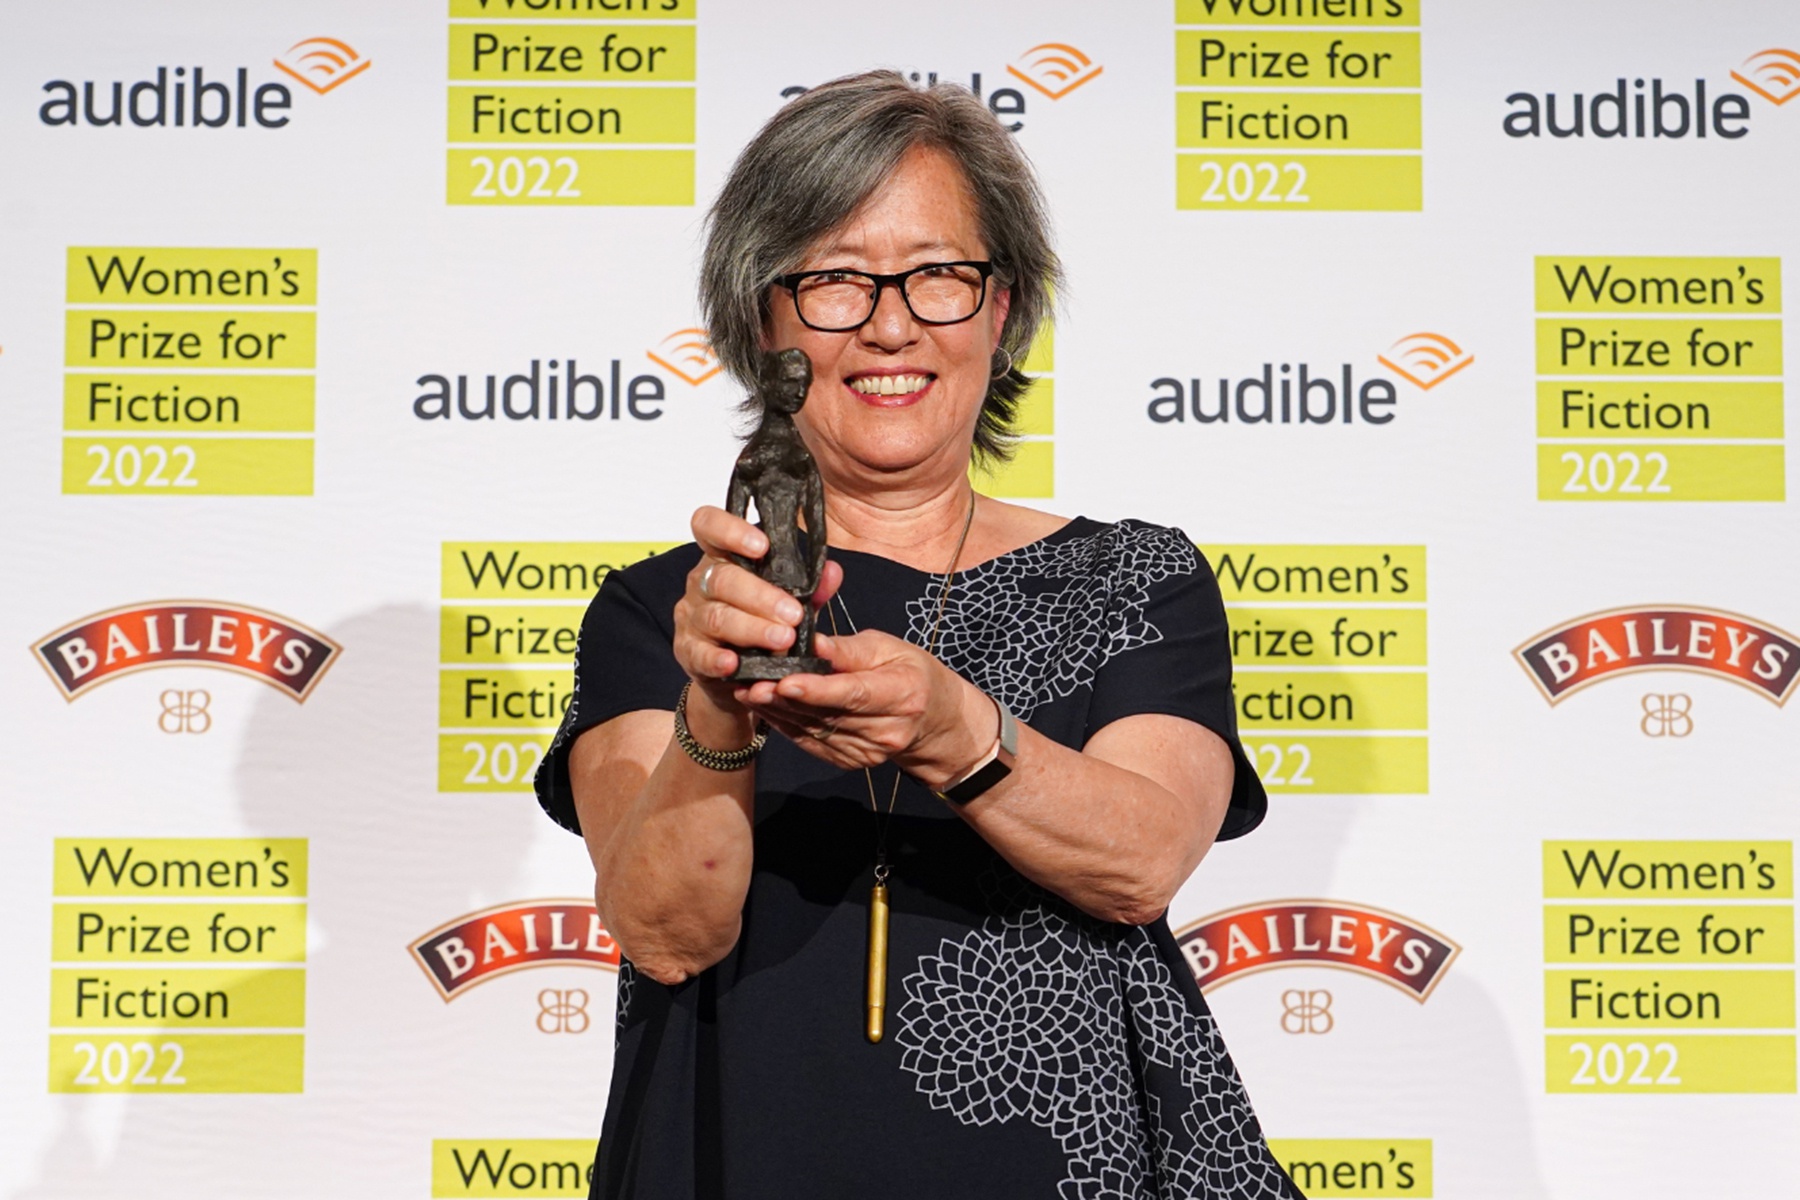 Women’s Prize for Fiction anh 1